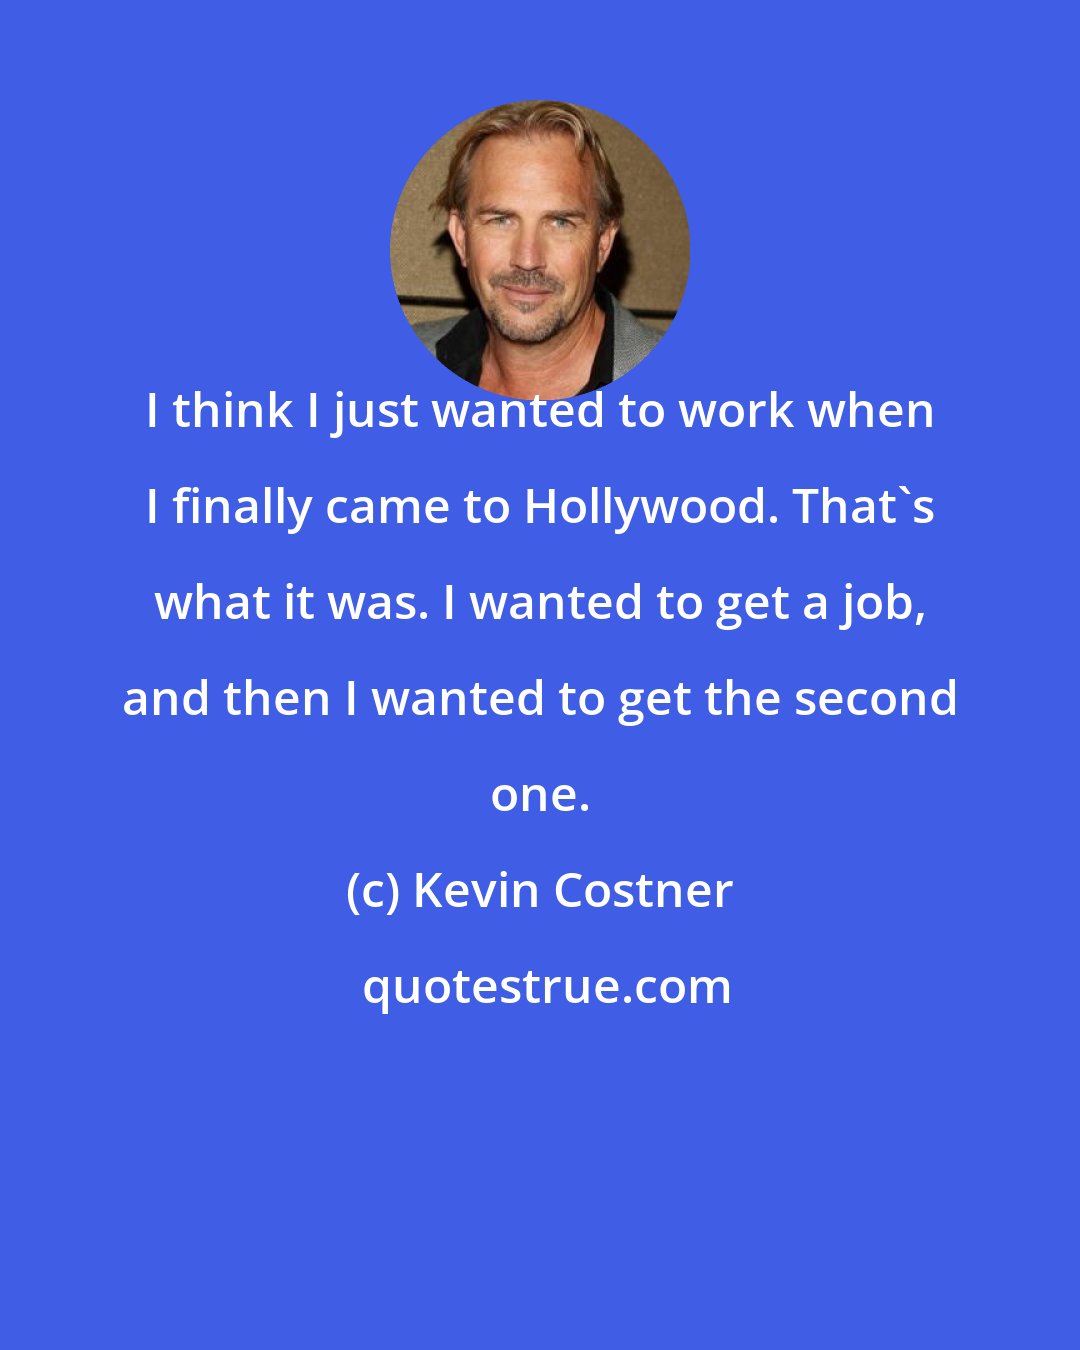 Kevin Costner: I think I just wanted to work when I finally came to Hollywood. That's what it was. I wanted to get a job, and then I wanted to get the second one.